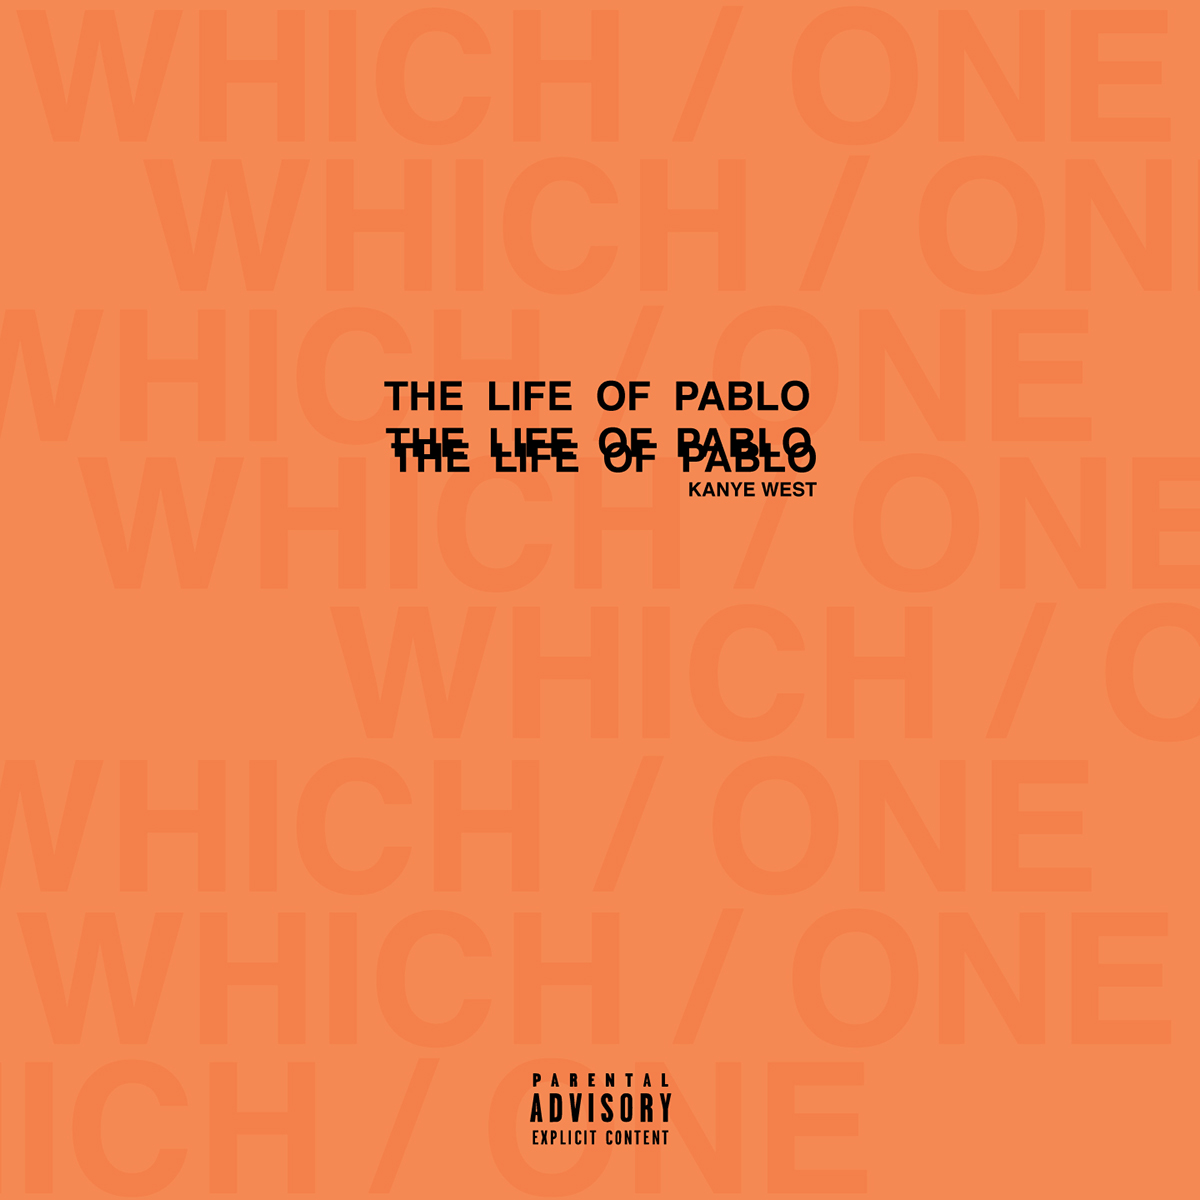 11. The Life Of Pablo Alternate Cover Concept. 